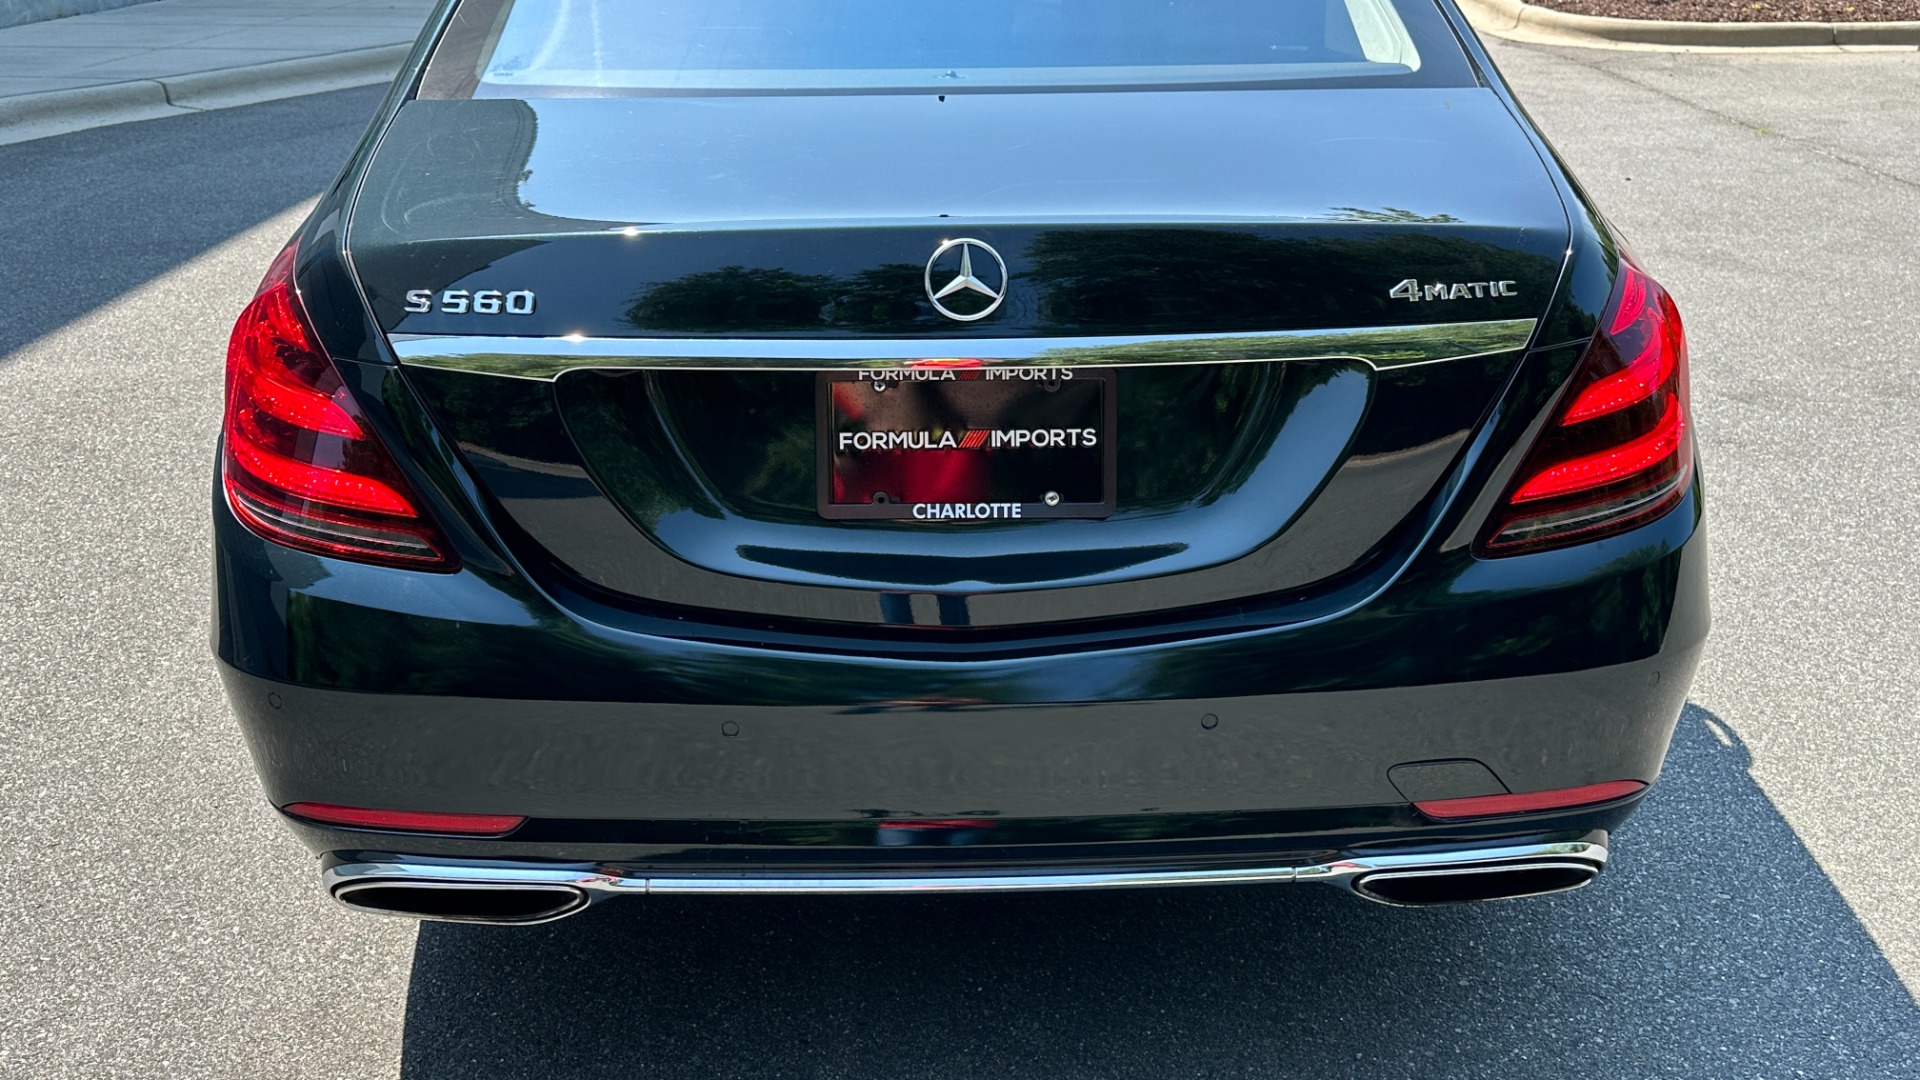 Used 2018 Mercedes-Benz S-Class S560 / EXECUTIVE PACKAGE / PREMIUM / DRIVER ASSIST for sale Sold at Formula Imports in Charlotte NC 28227 8